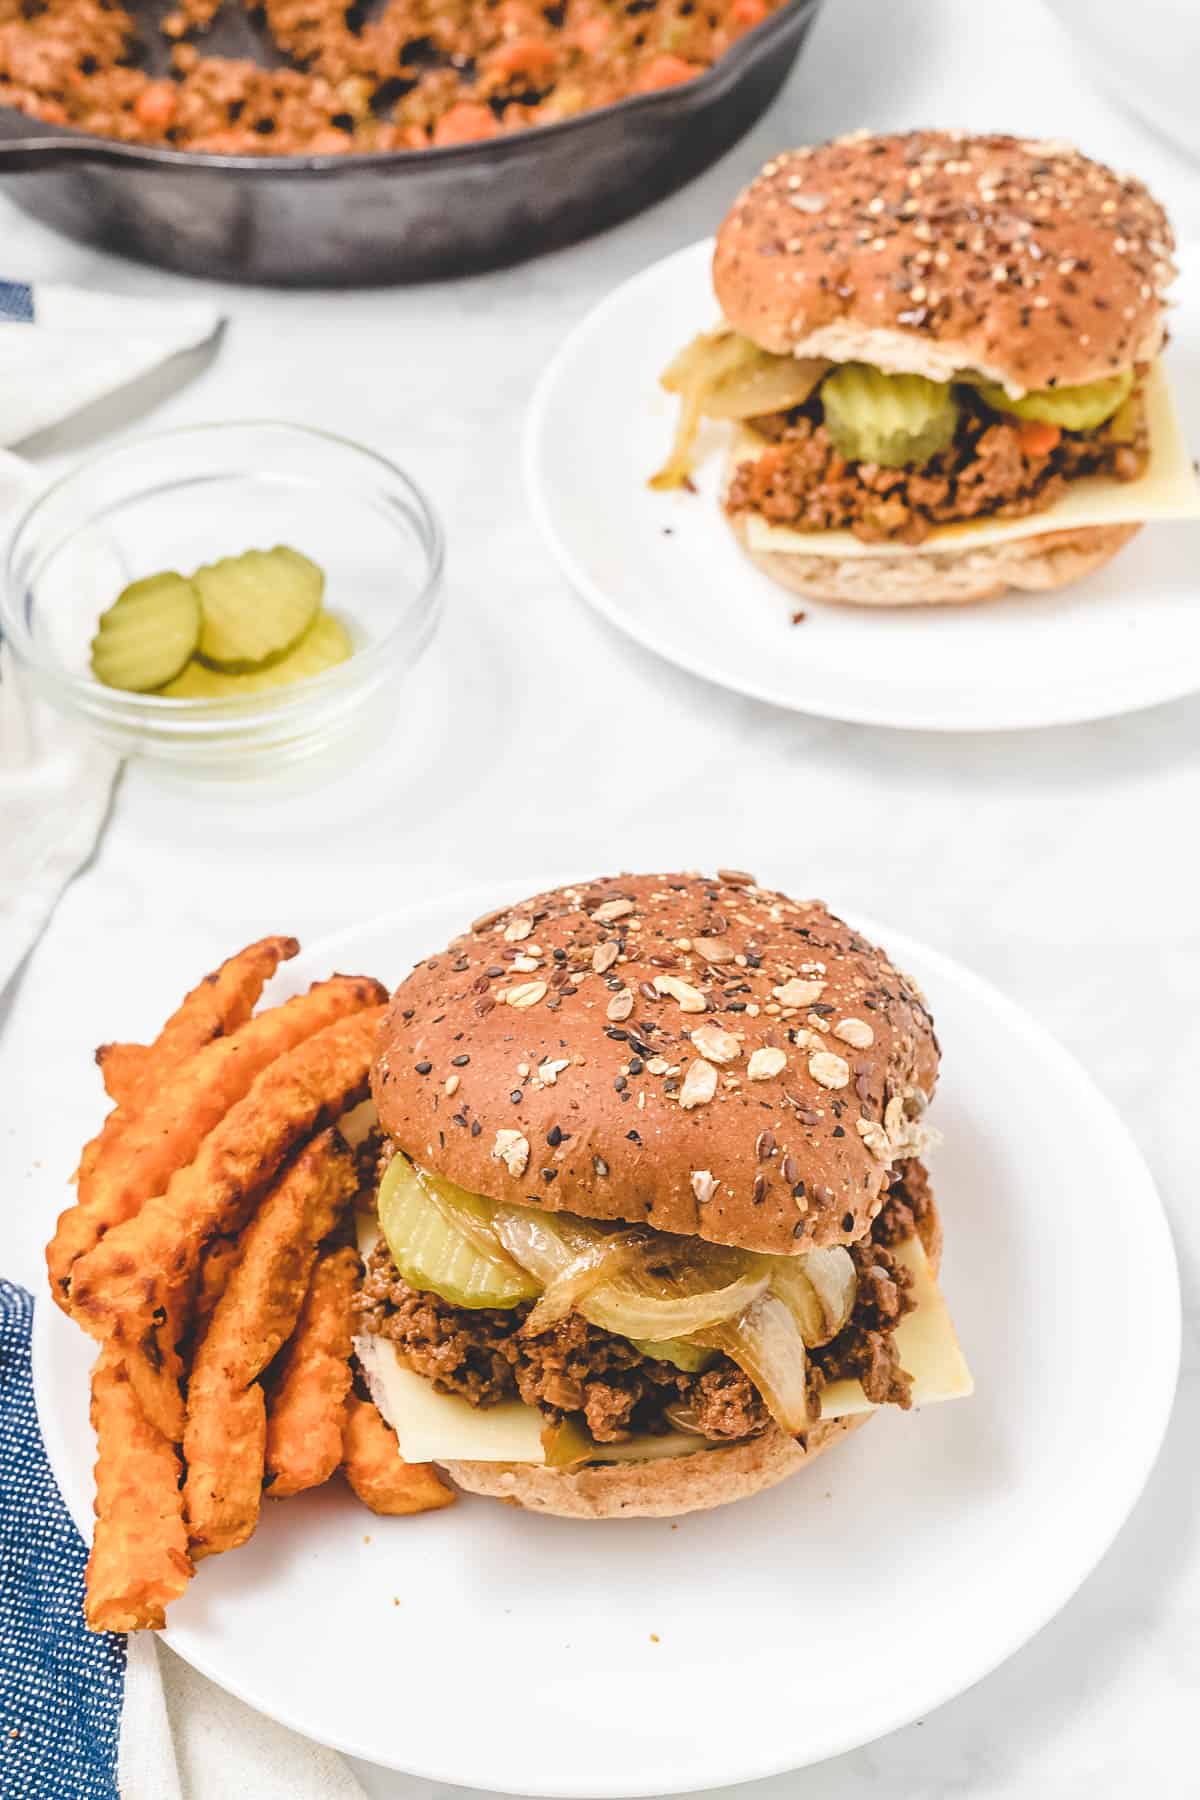 sloppy joes on whole wheat buns with sweet potato fries beside them on a white plate